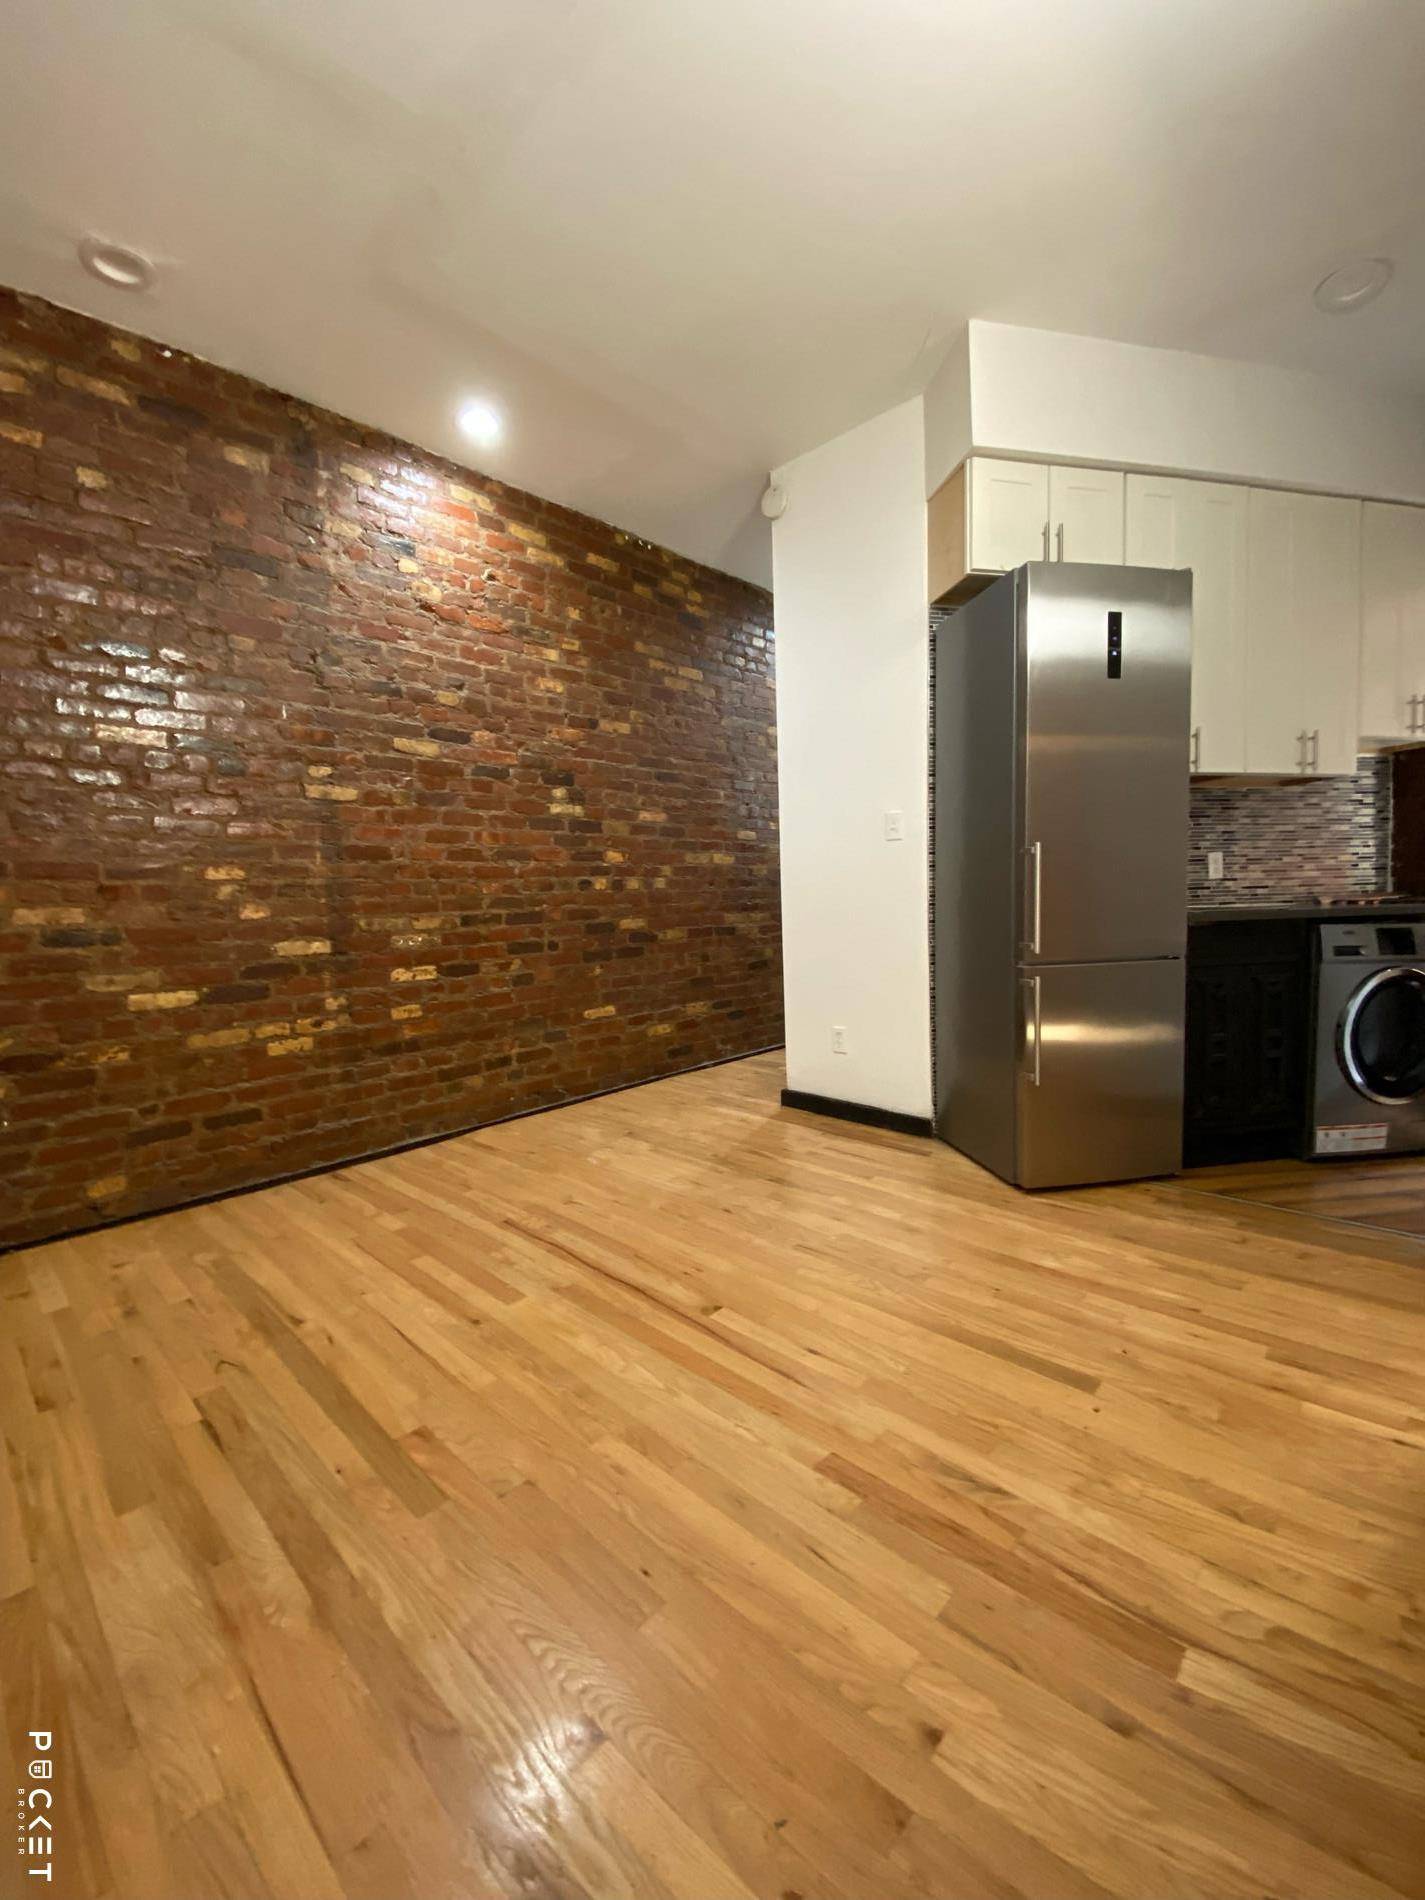 LARGE and BRIGHT 4 Bedroom near Union Square !